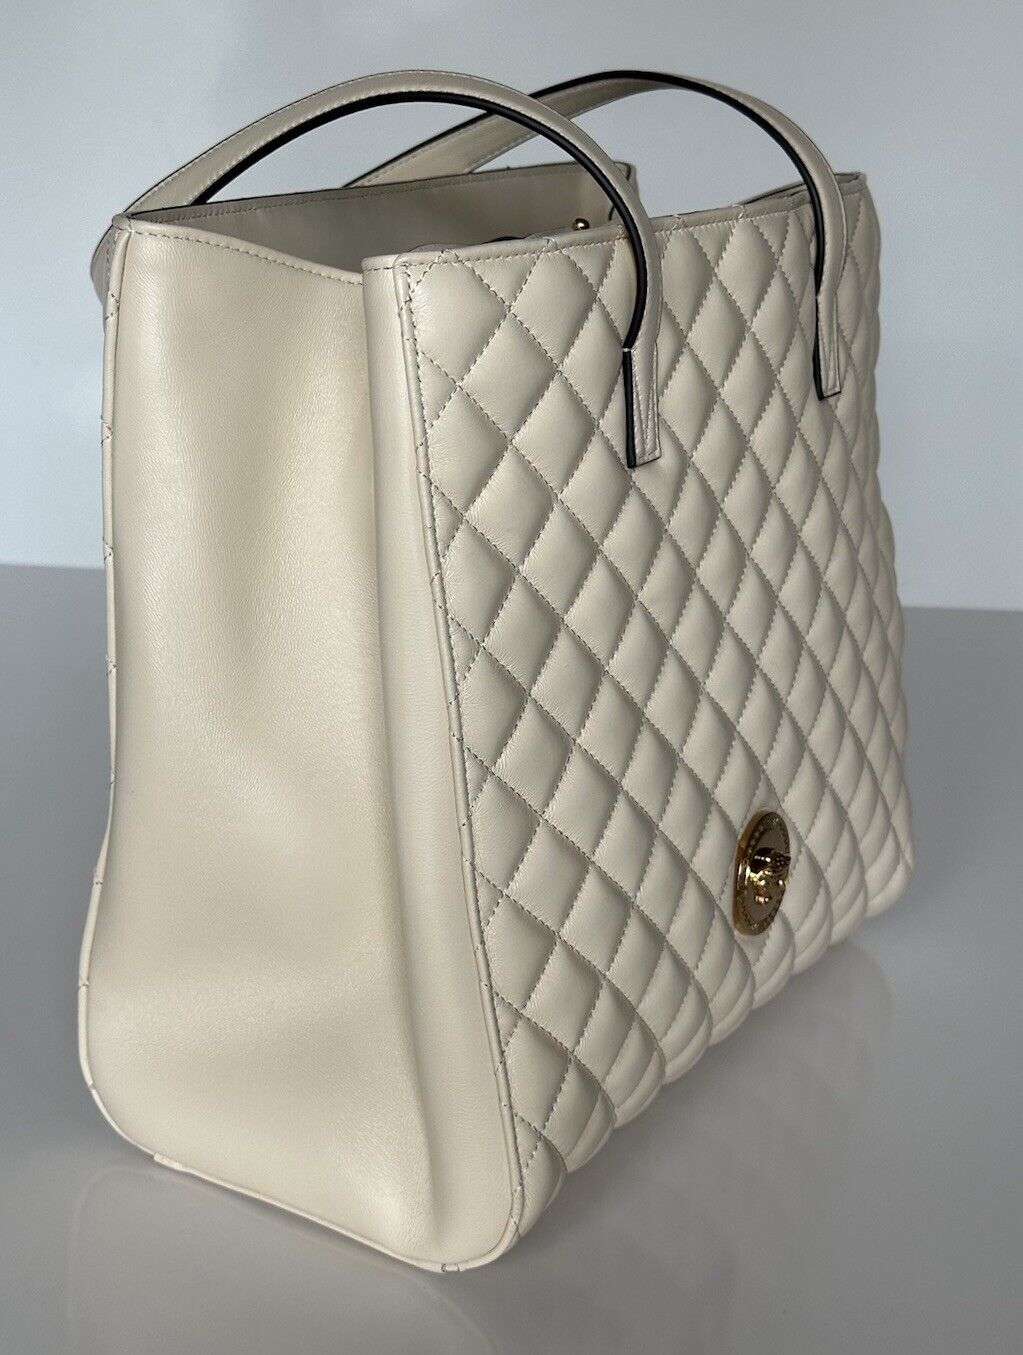 Versace Medusa Quilted Lamb Leather Off-White Tote Bag 1013789 IT NWT $1700